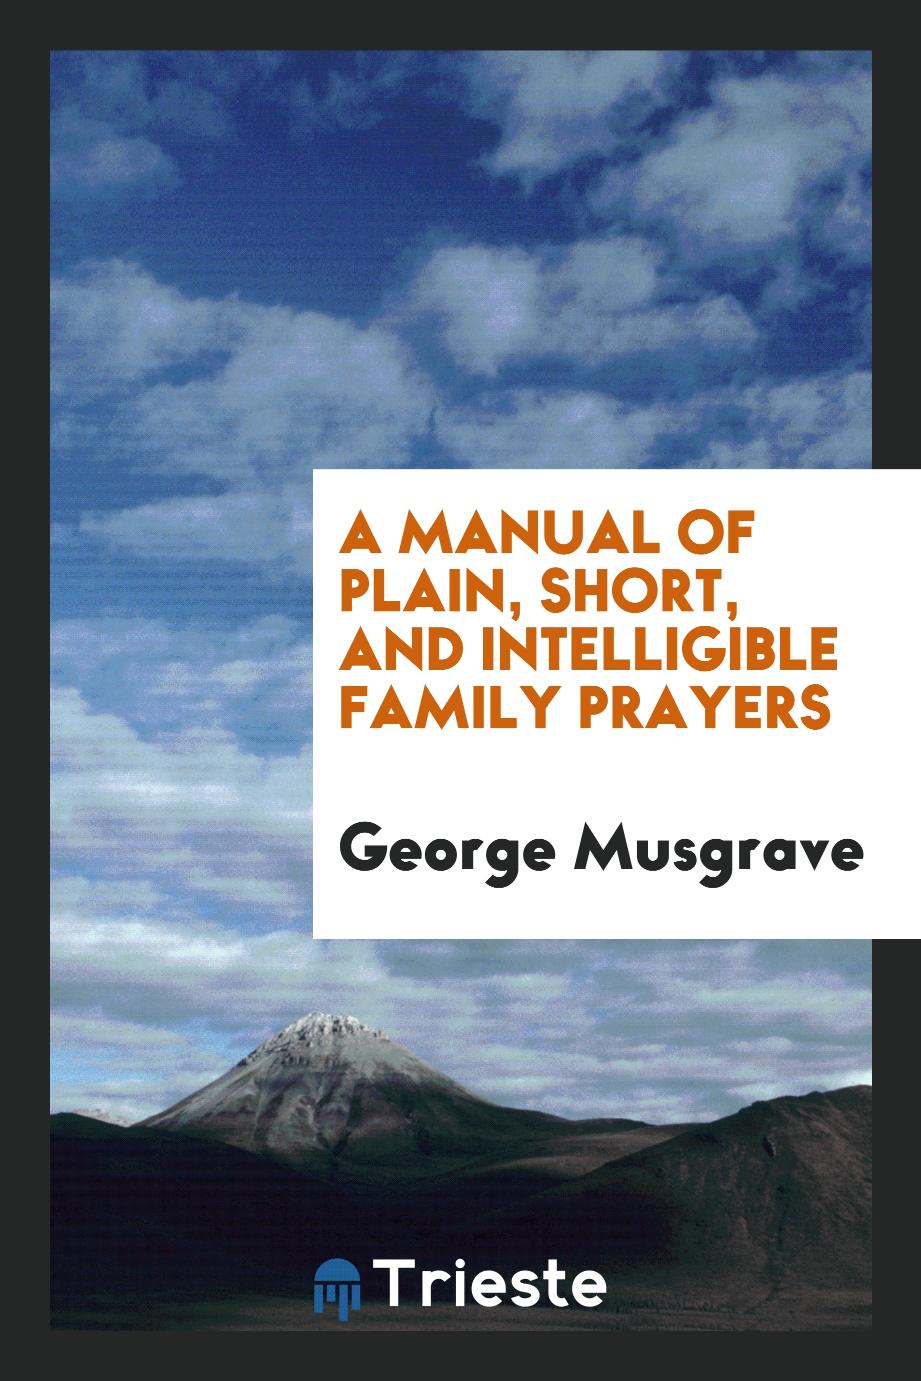 A Manual of Plain, Short, and Intelligible Family Prayers